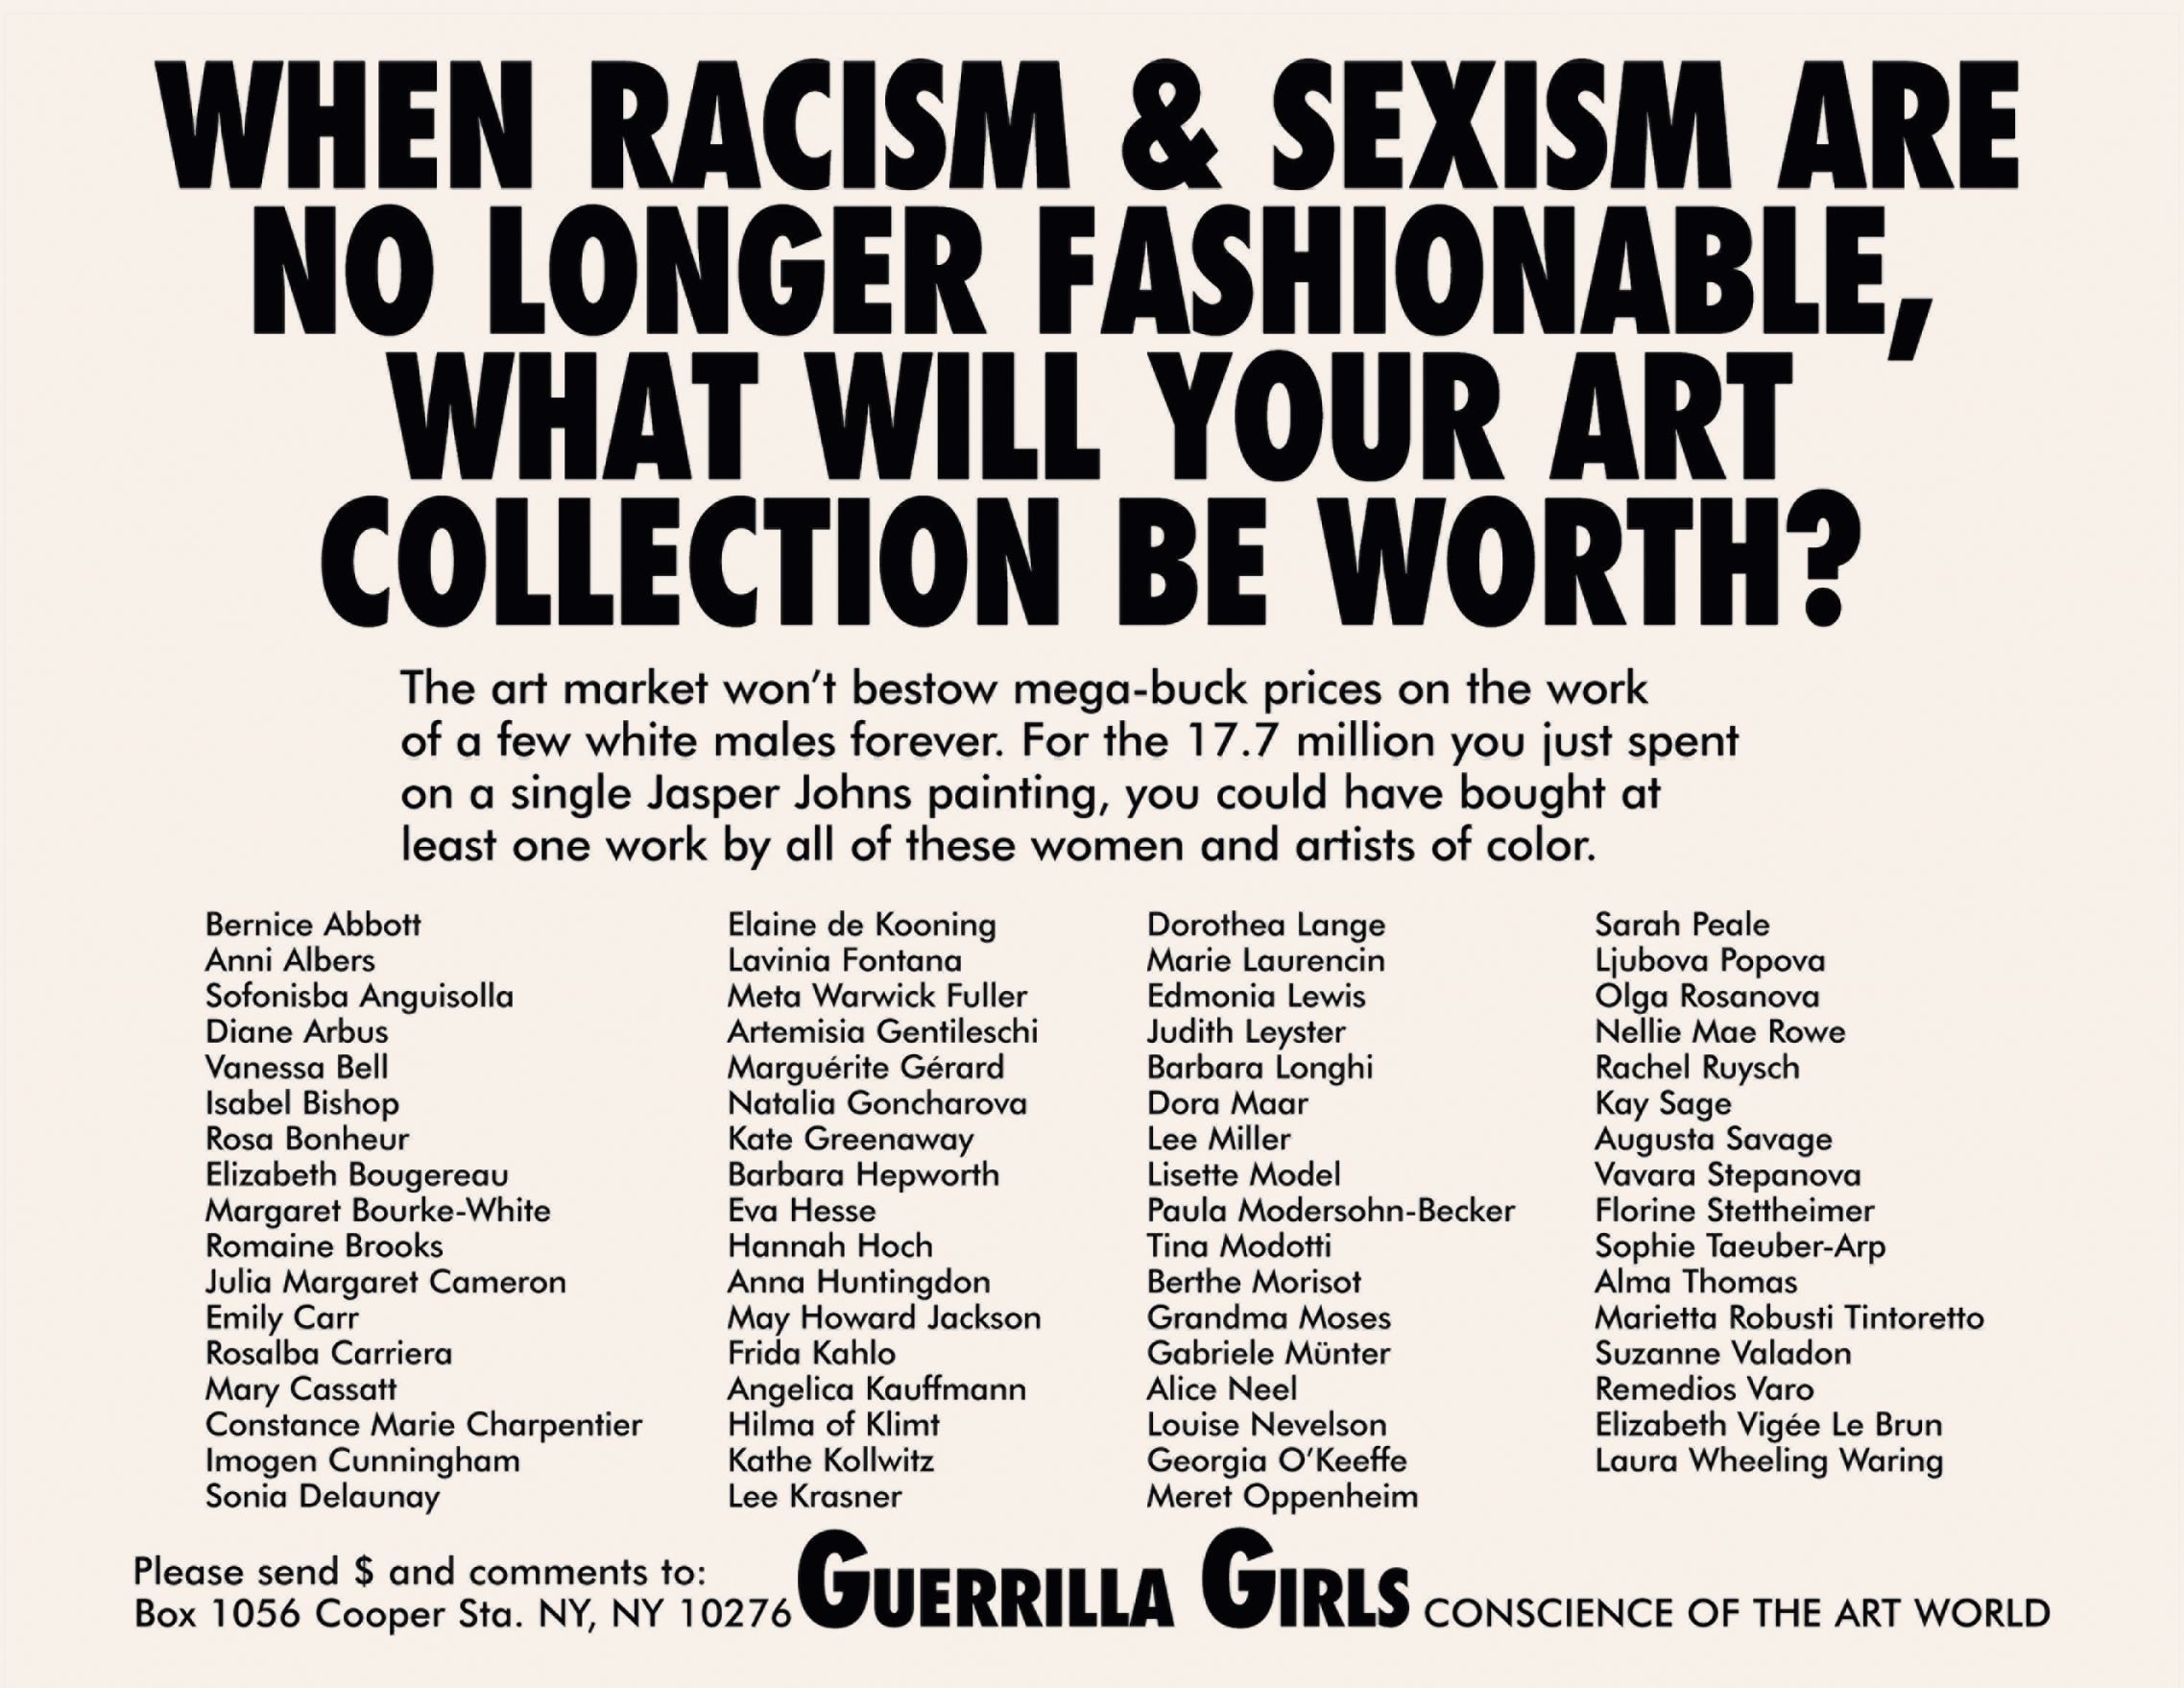 When Racism & Sexism are No Longer Fashionable, What Will Your Art Collection be Worth? 1989, by the Guerrilla Girls